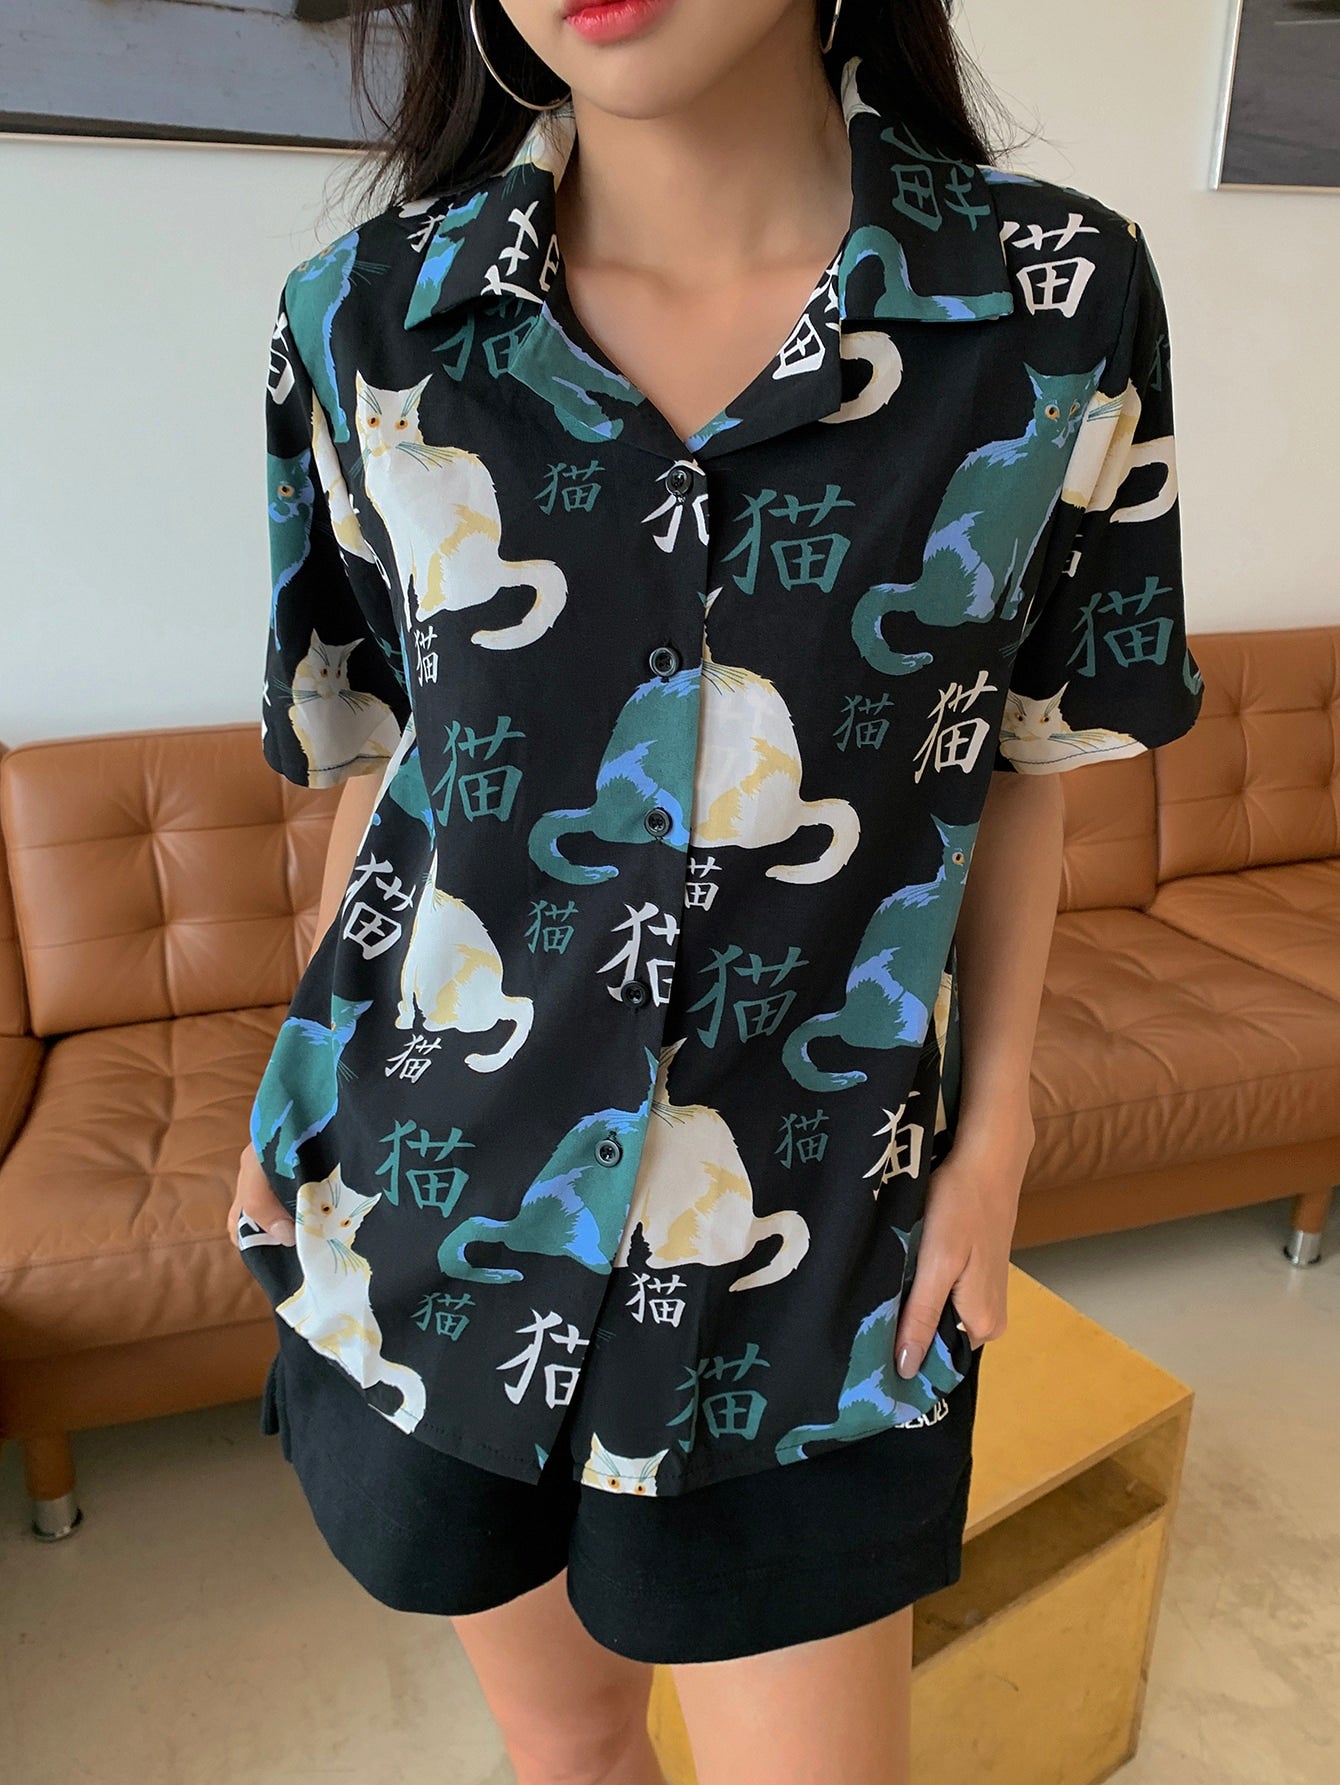 Chinese Letter & Cat Print Shirt